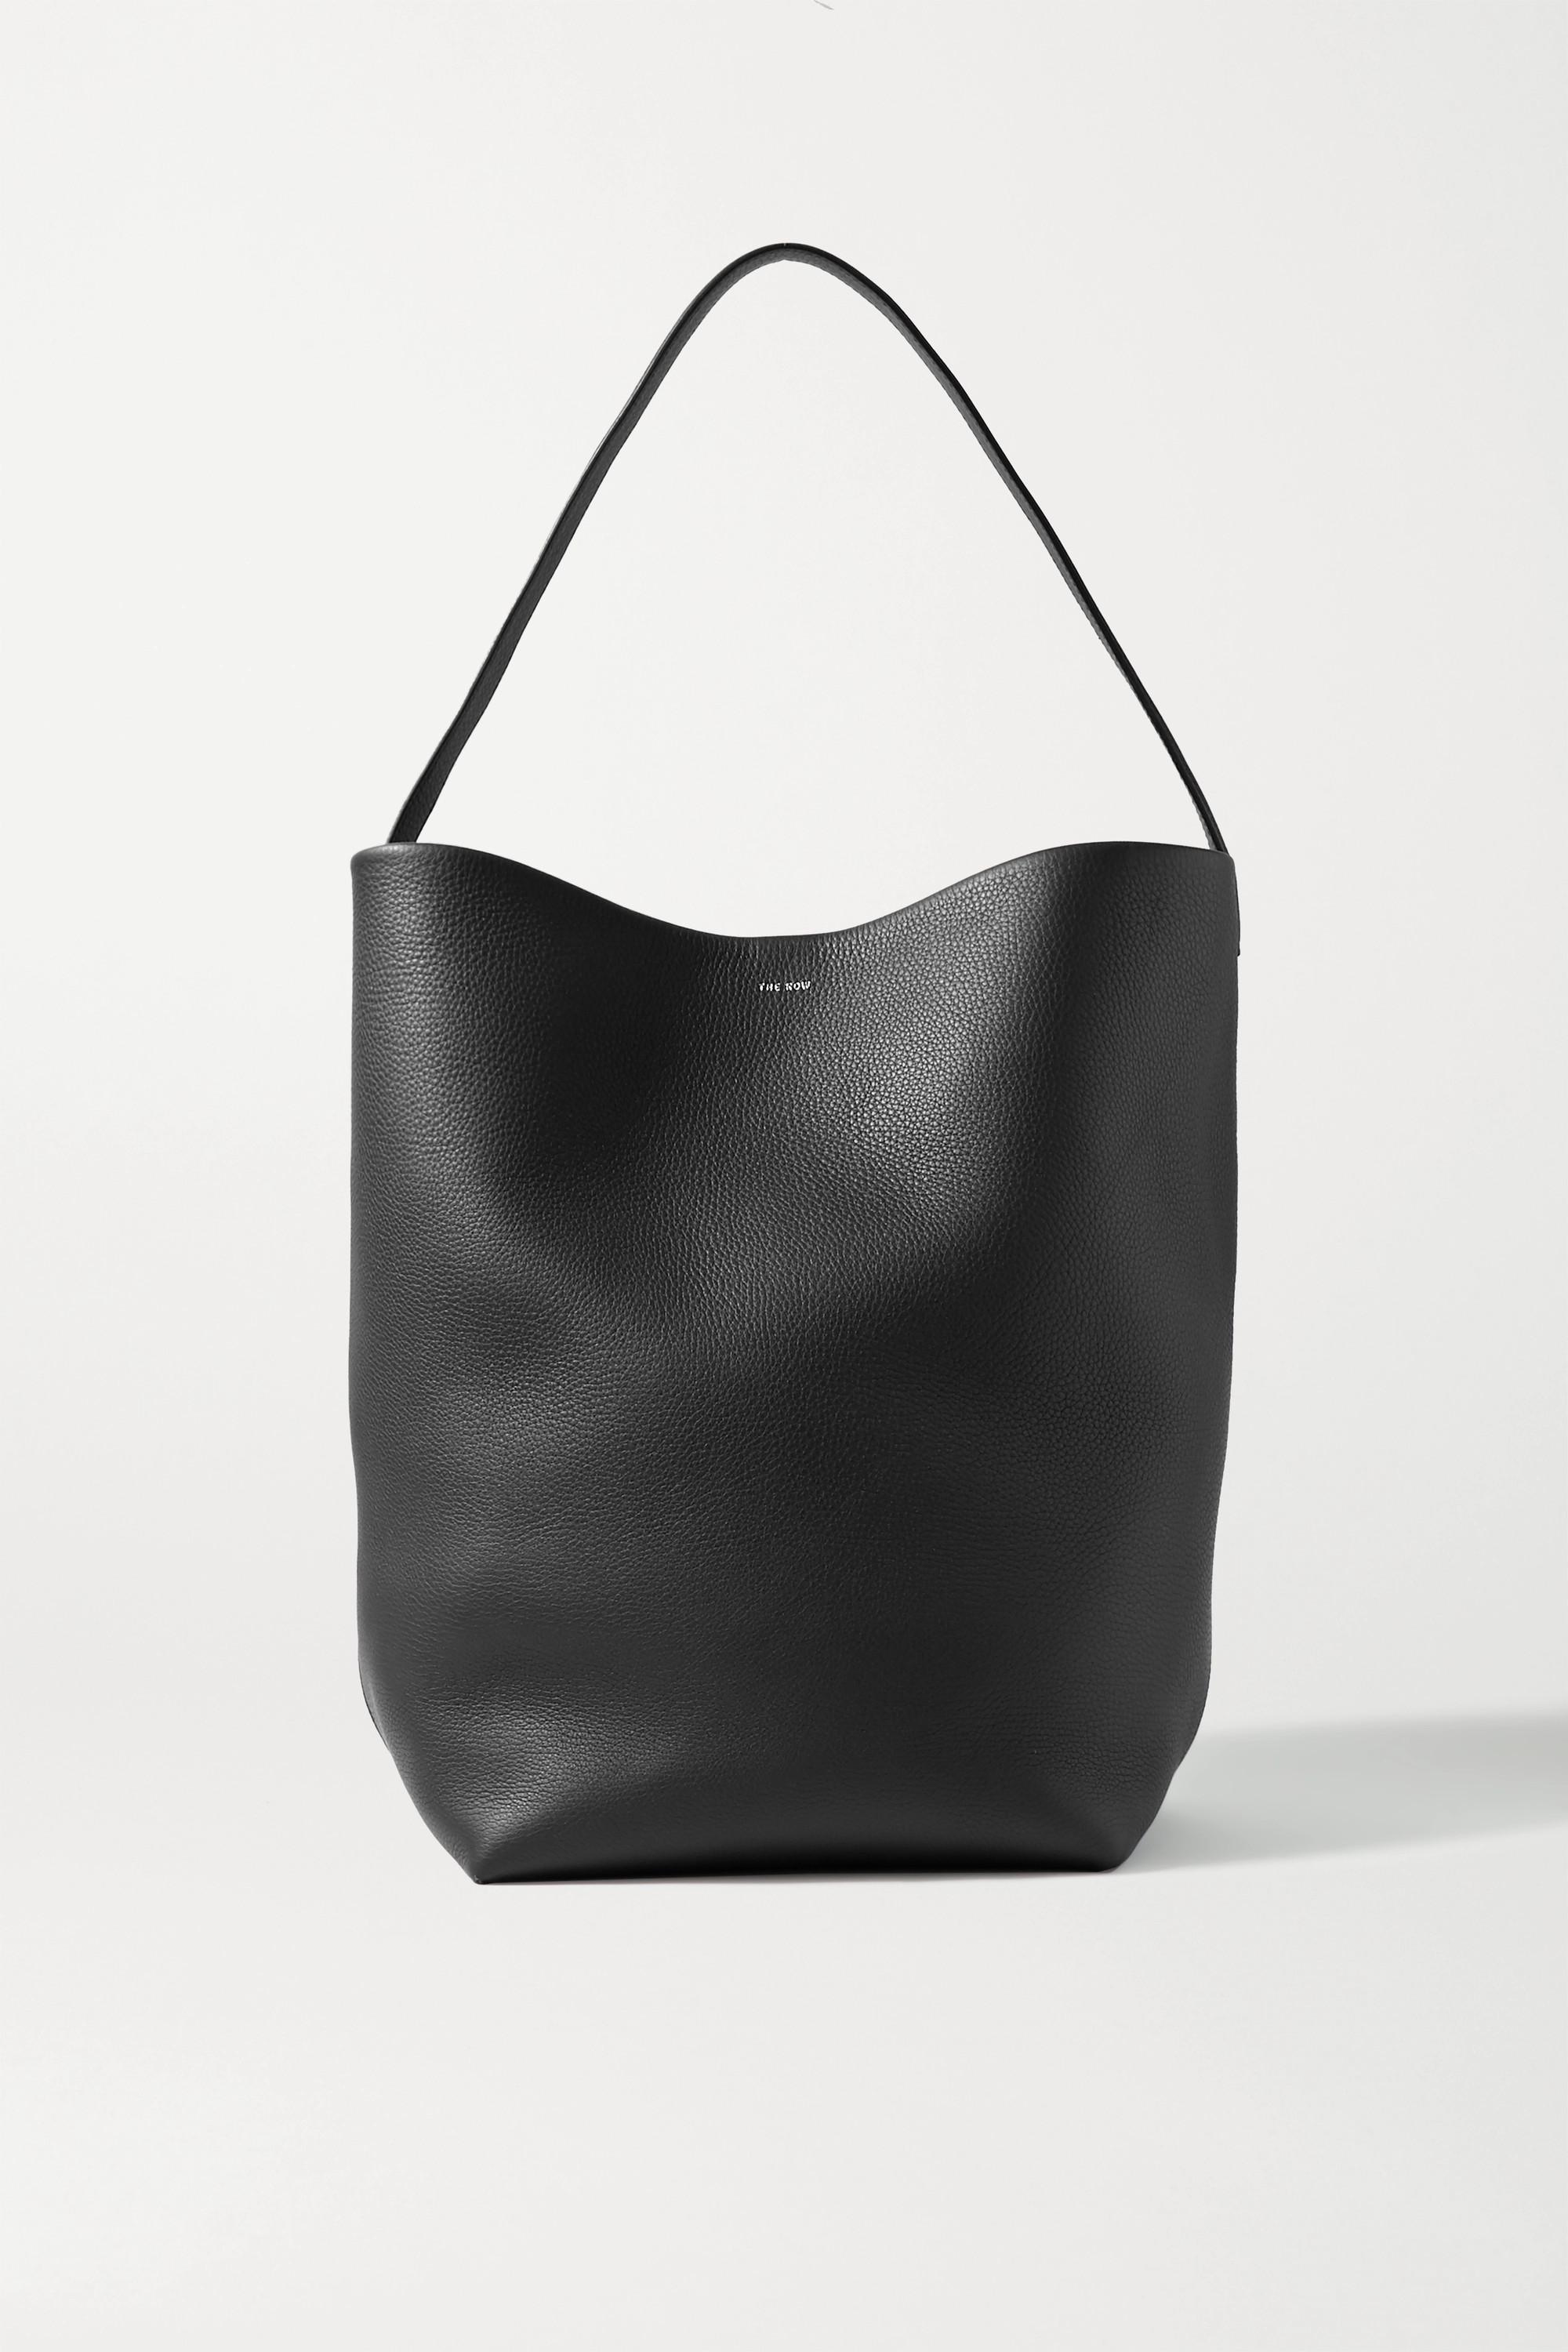 The Row Park Textured Leather Tote, $1,790